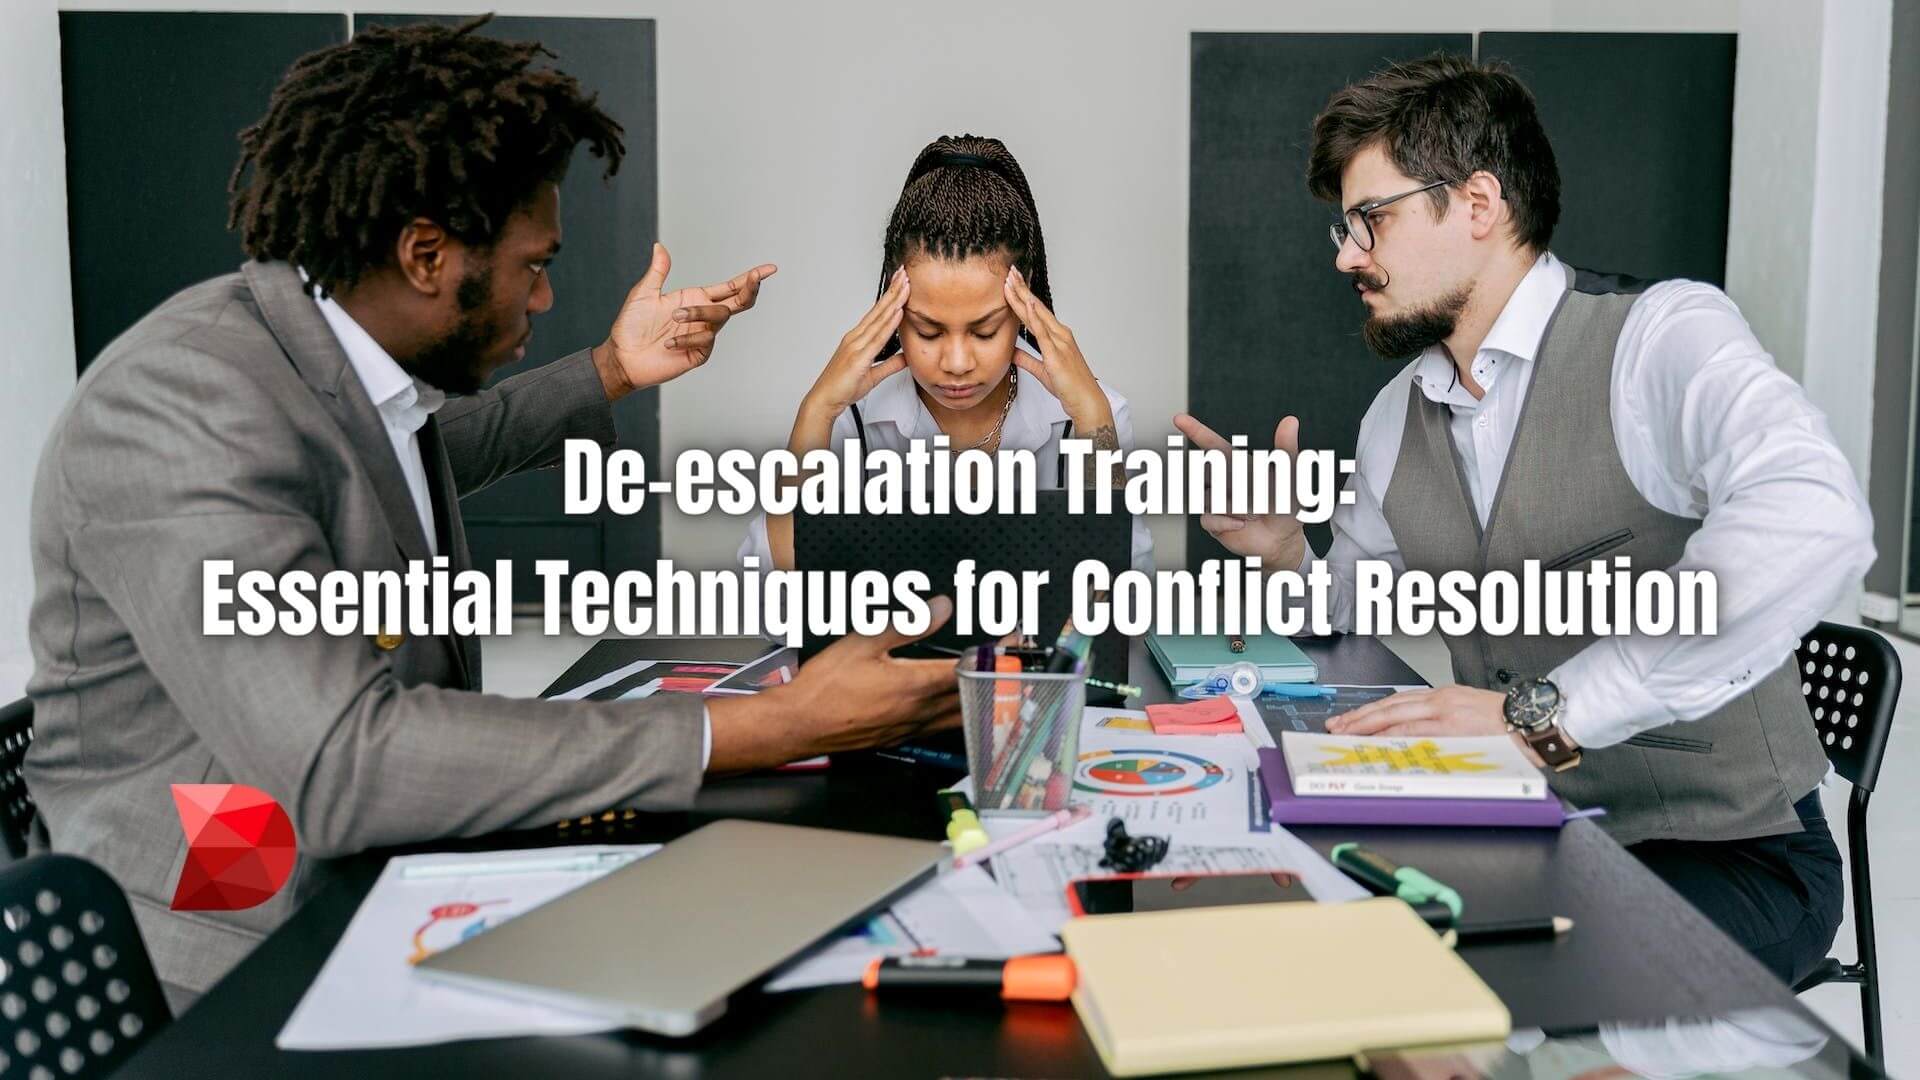 Master conflict resolution with this comprehensive guide! Learn essential de-escalation training for effective conflict management.